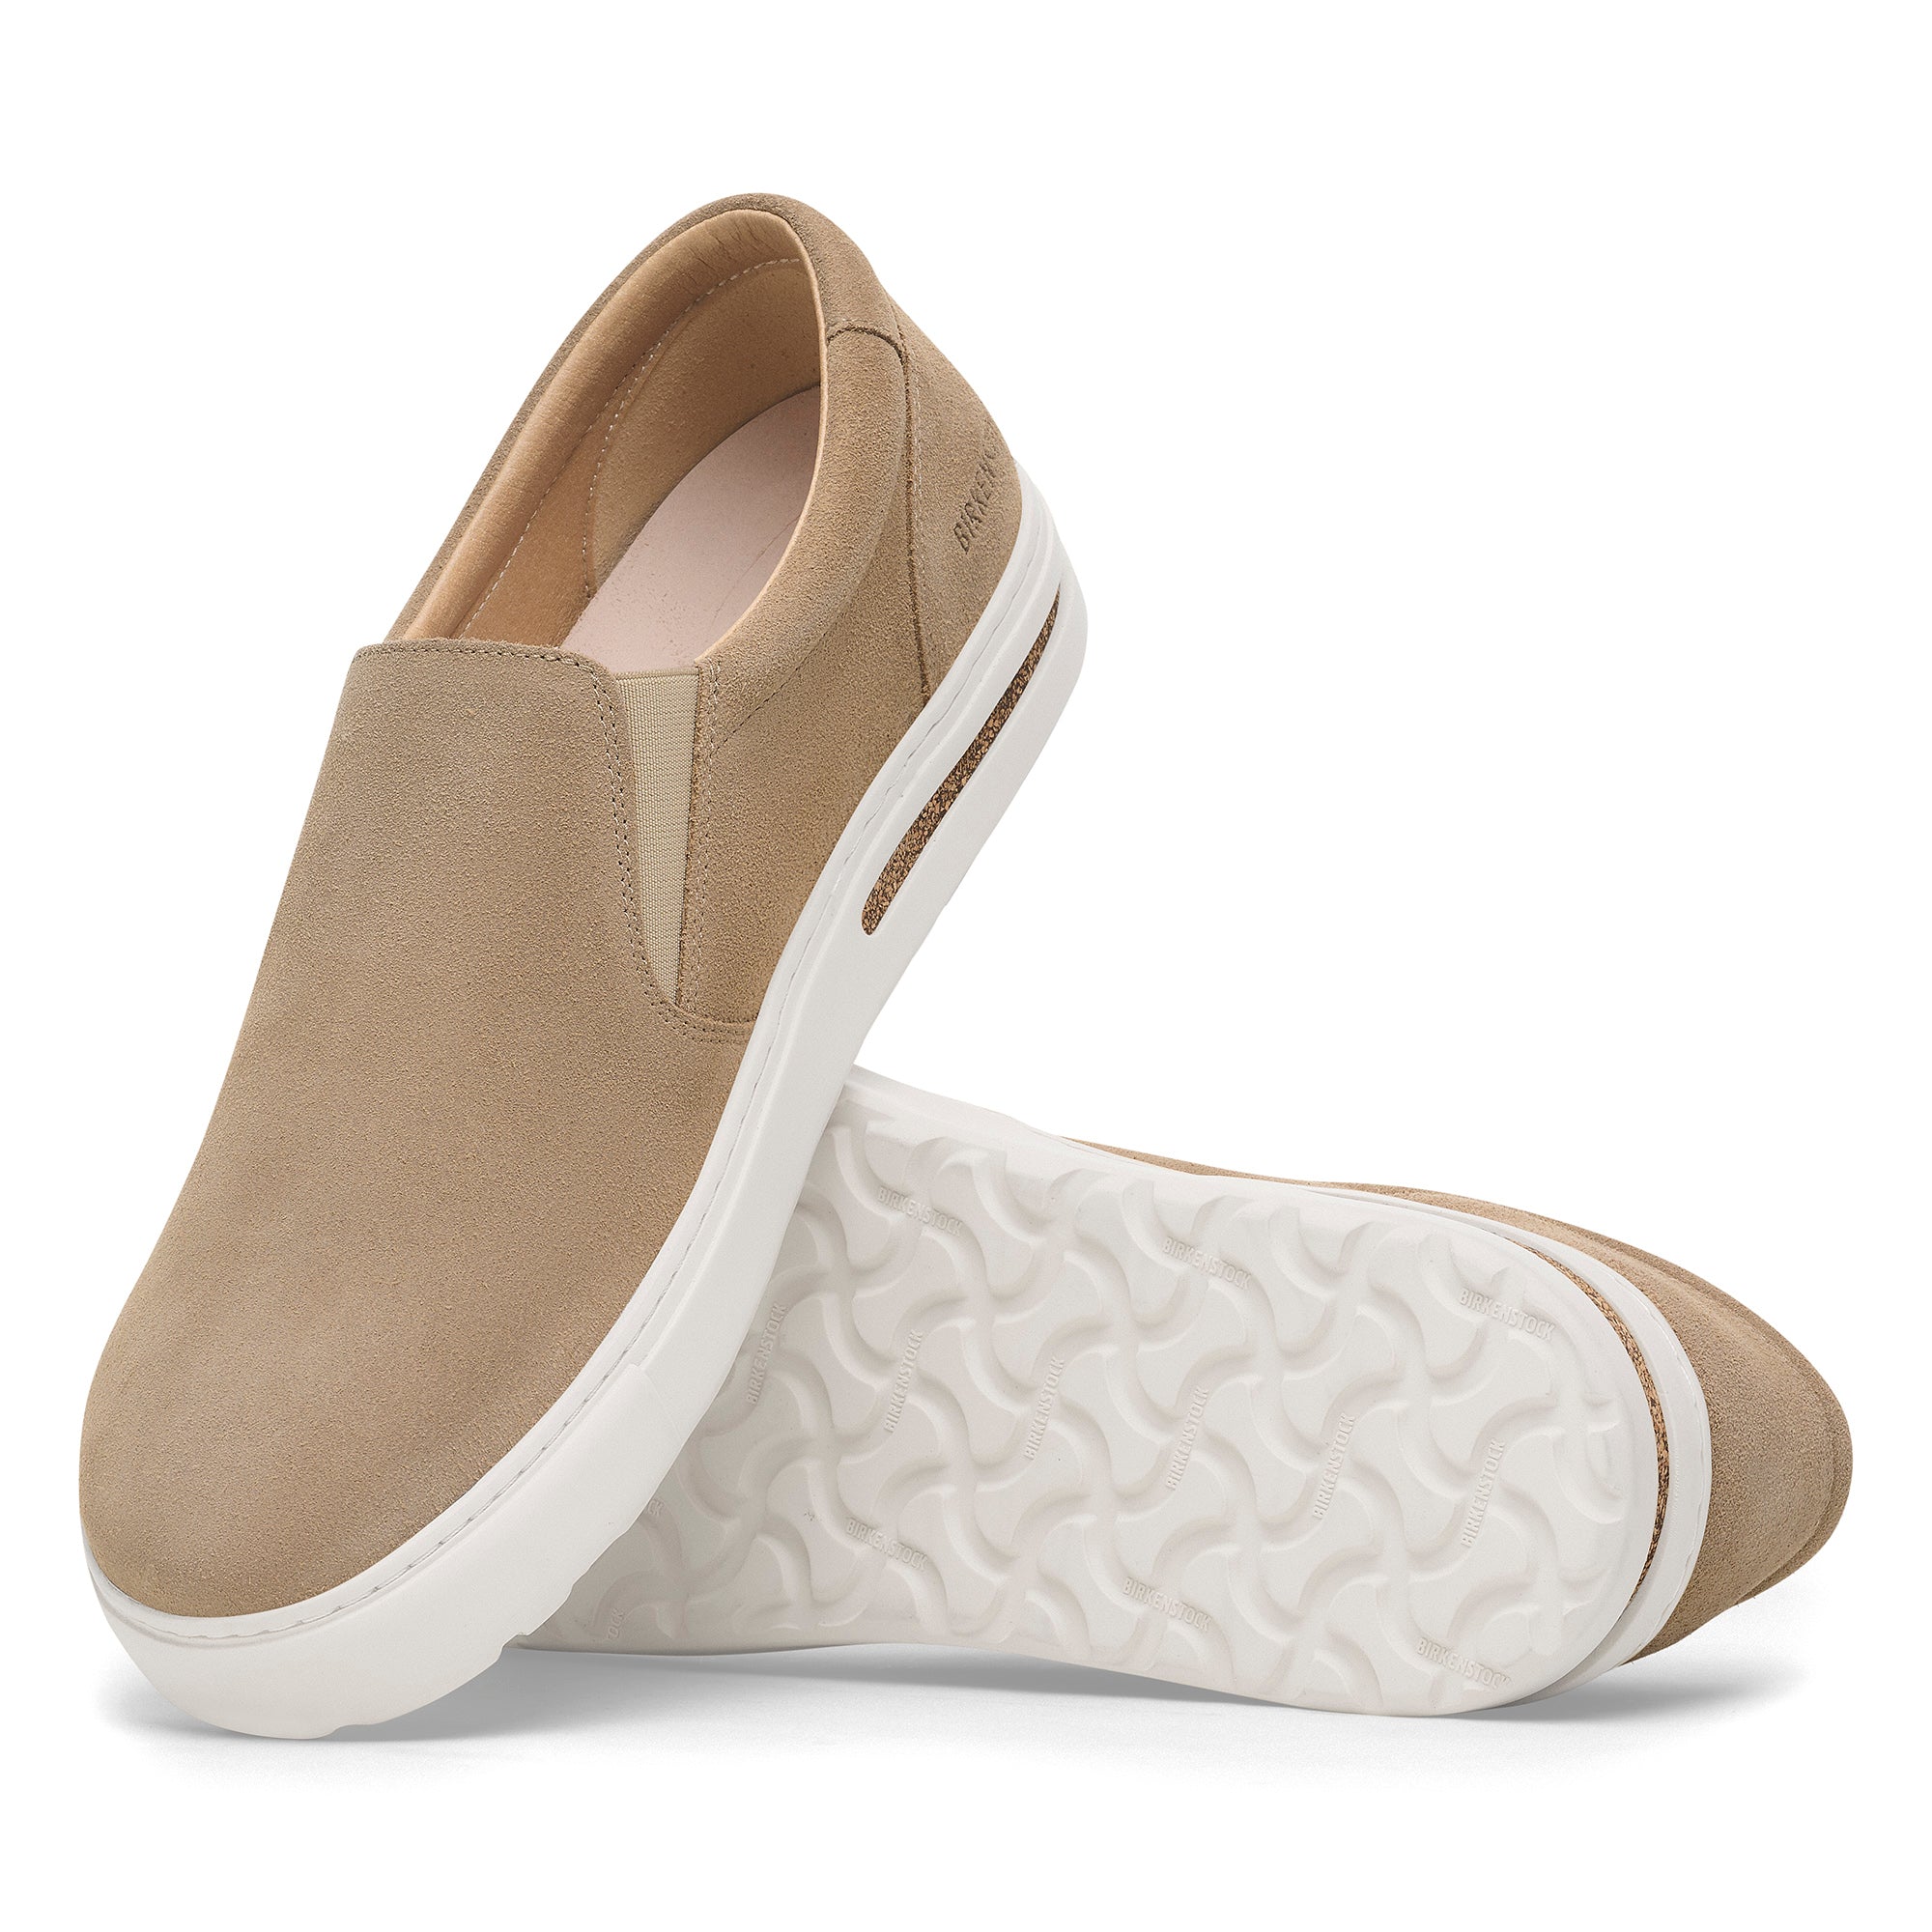 Birkenstock Limited Edition Oswego taupe suede